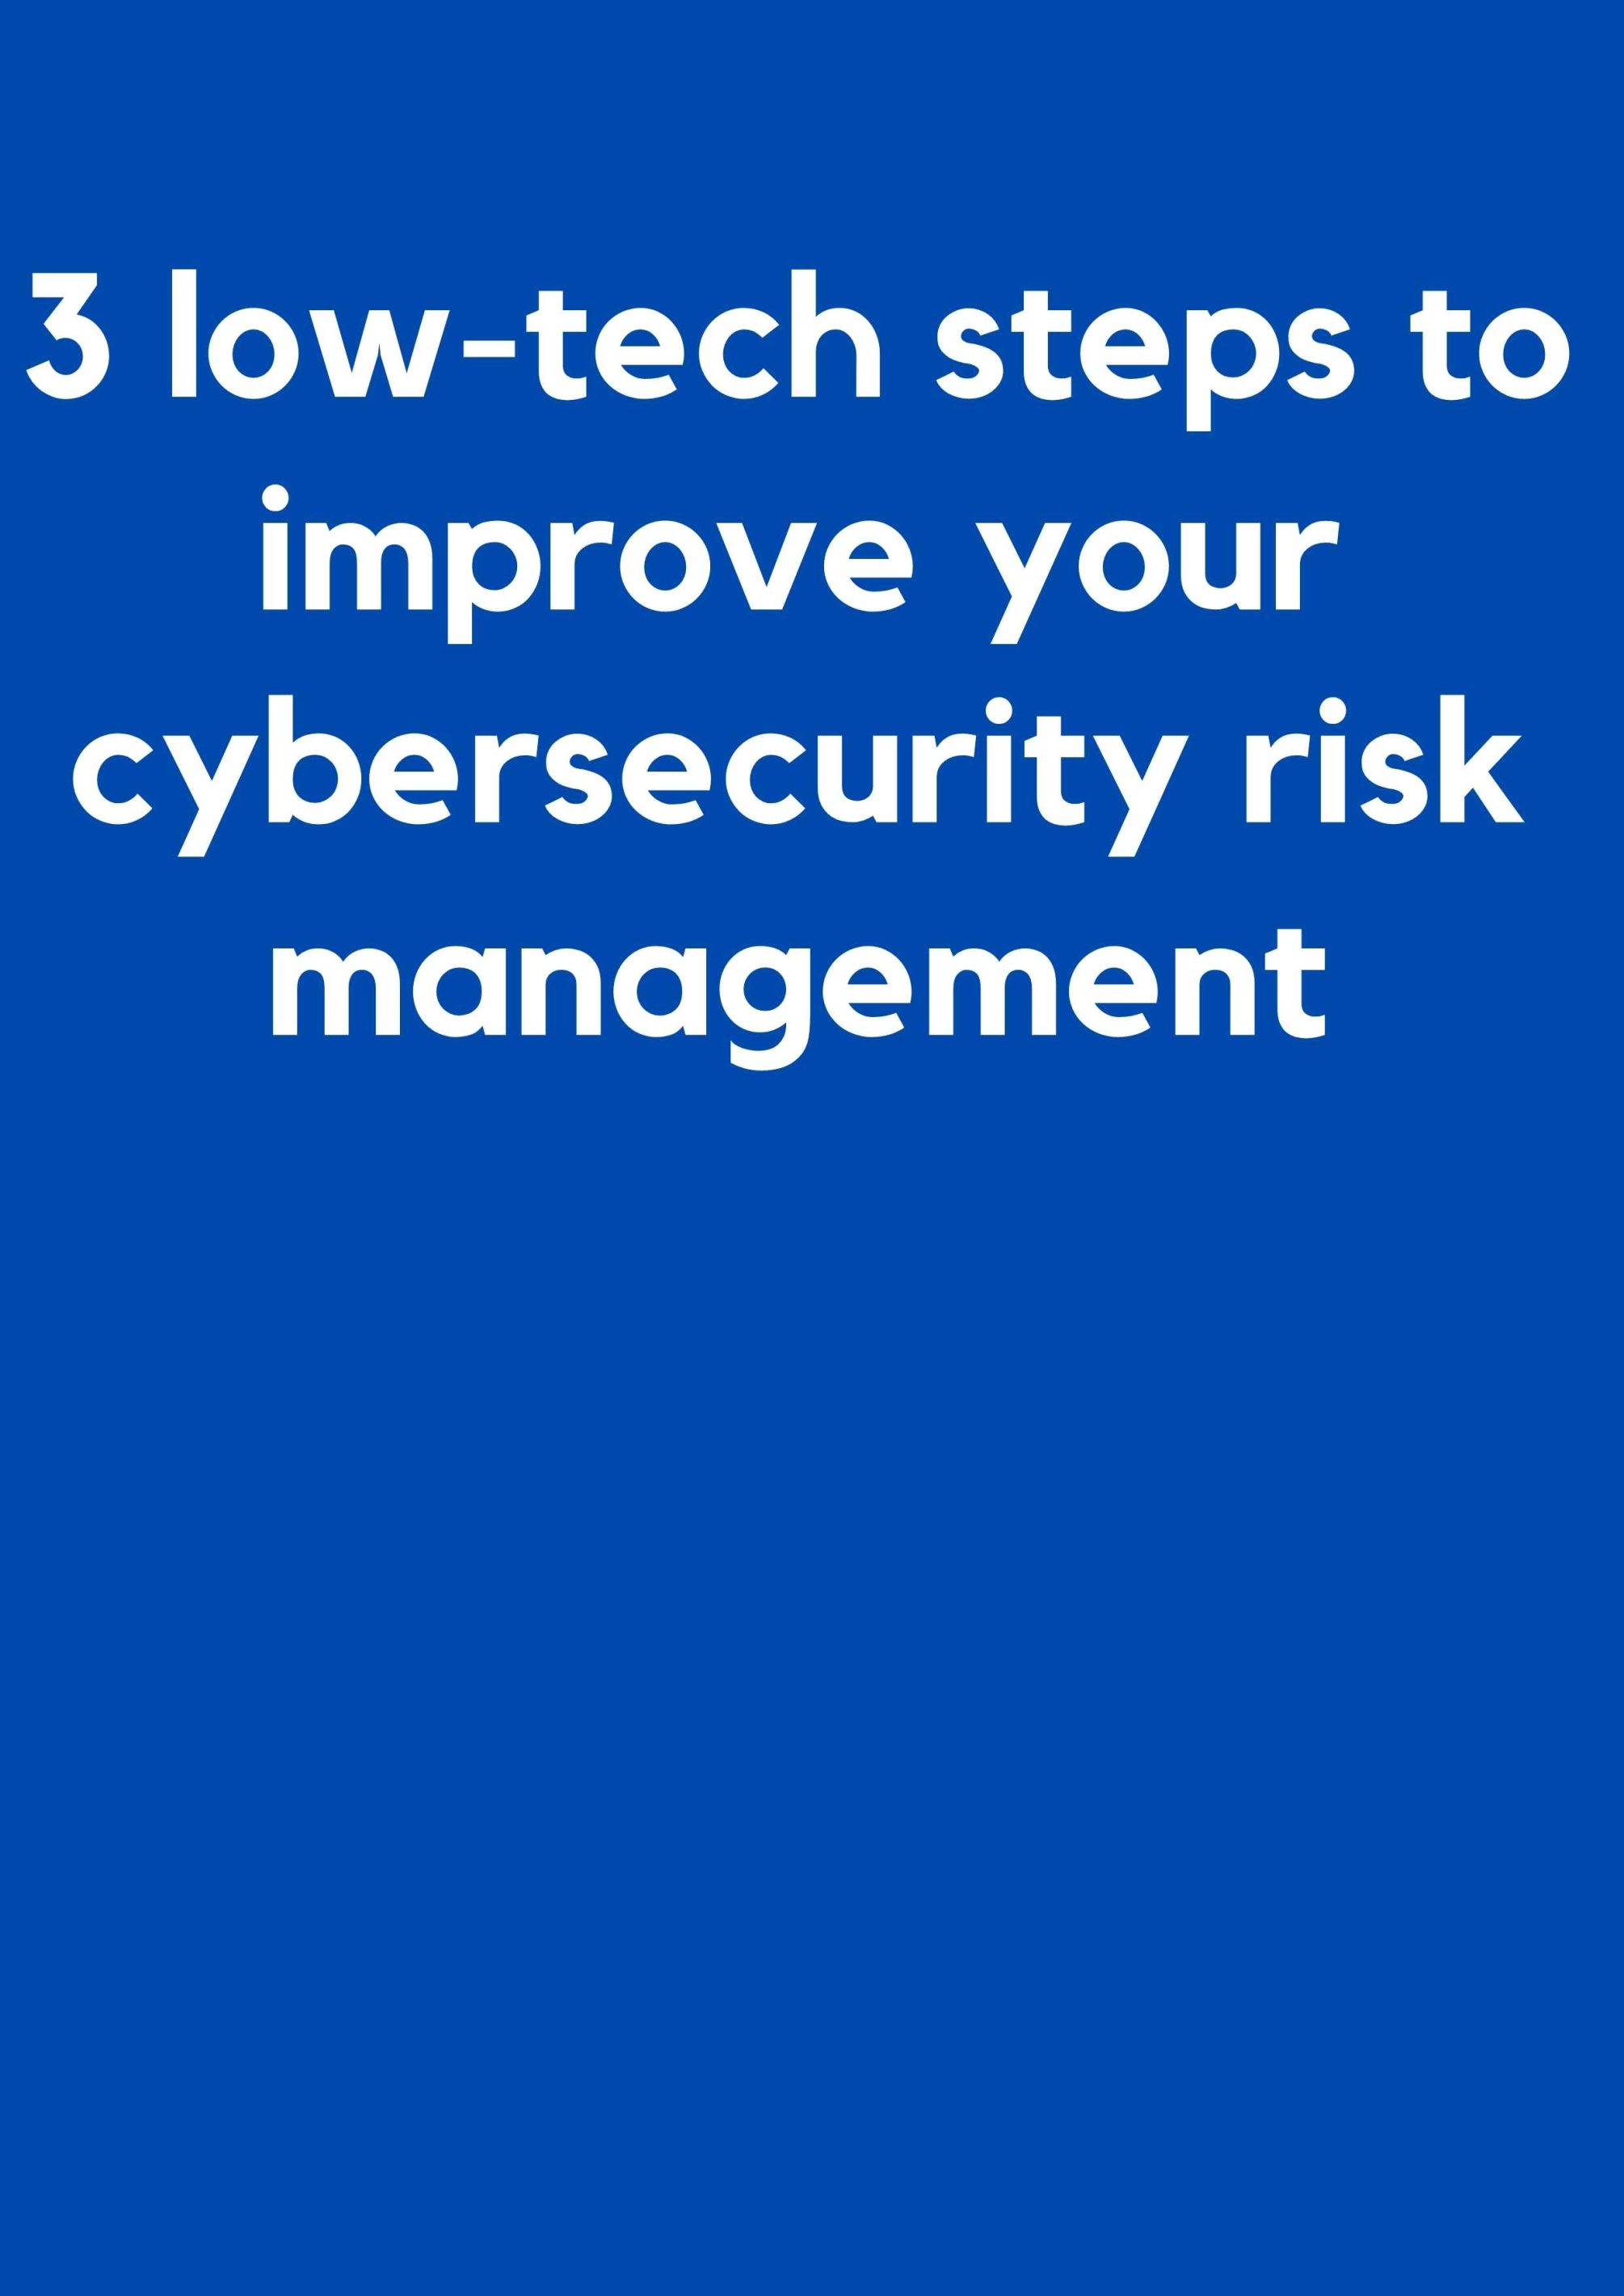 3 low-tech steps to improve your cybersecurity risk management